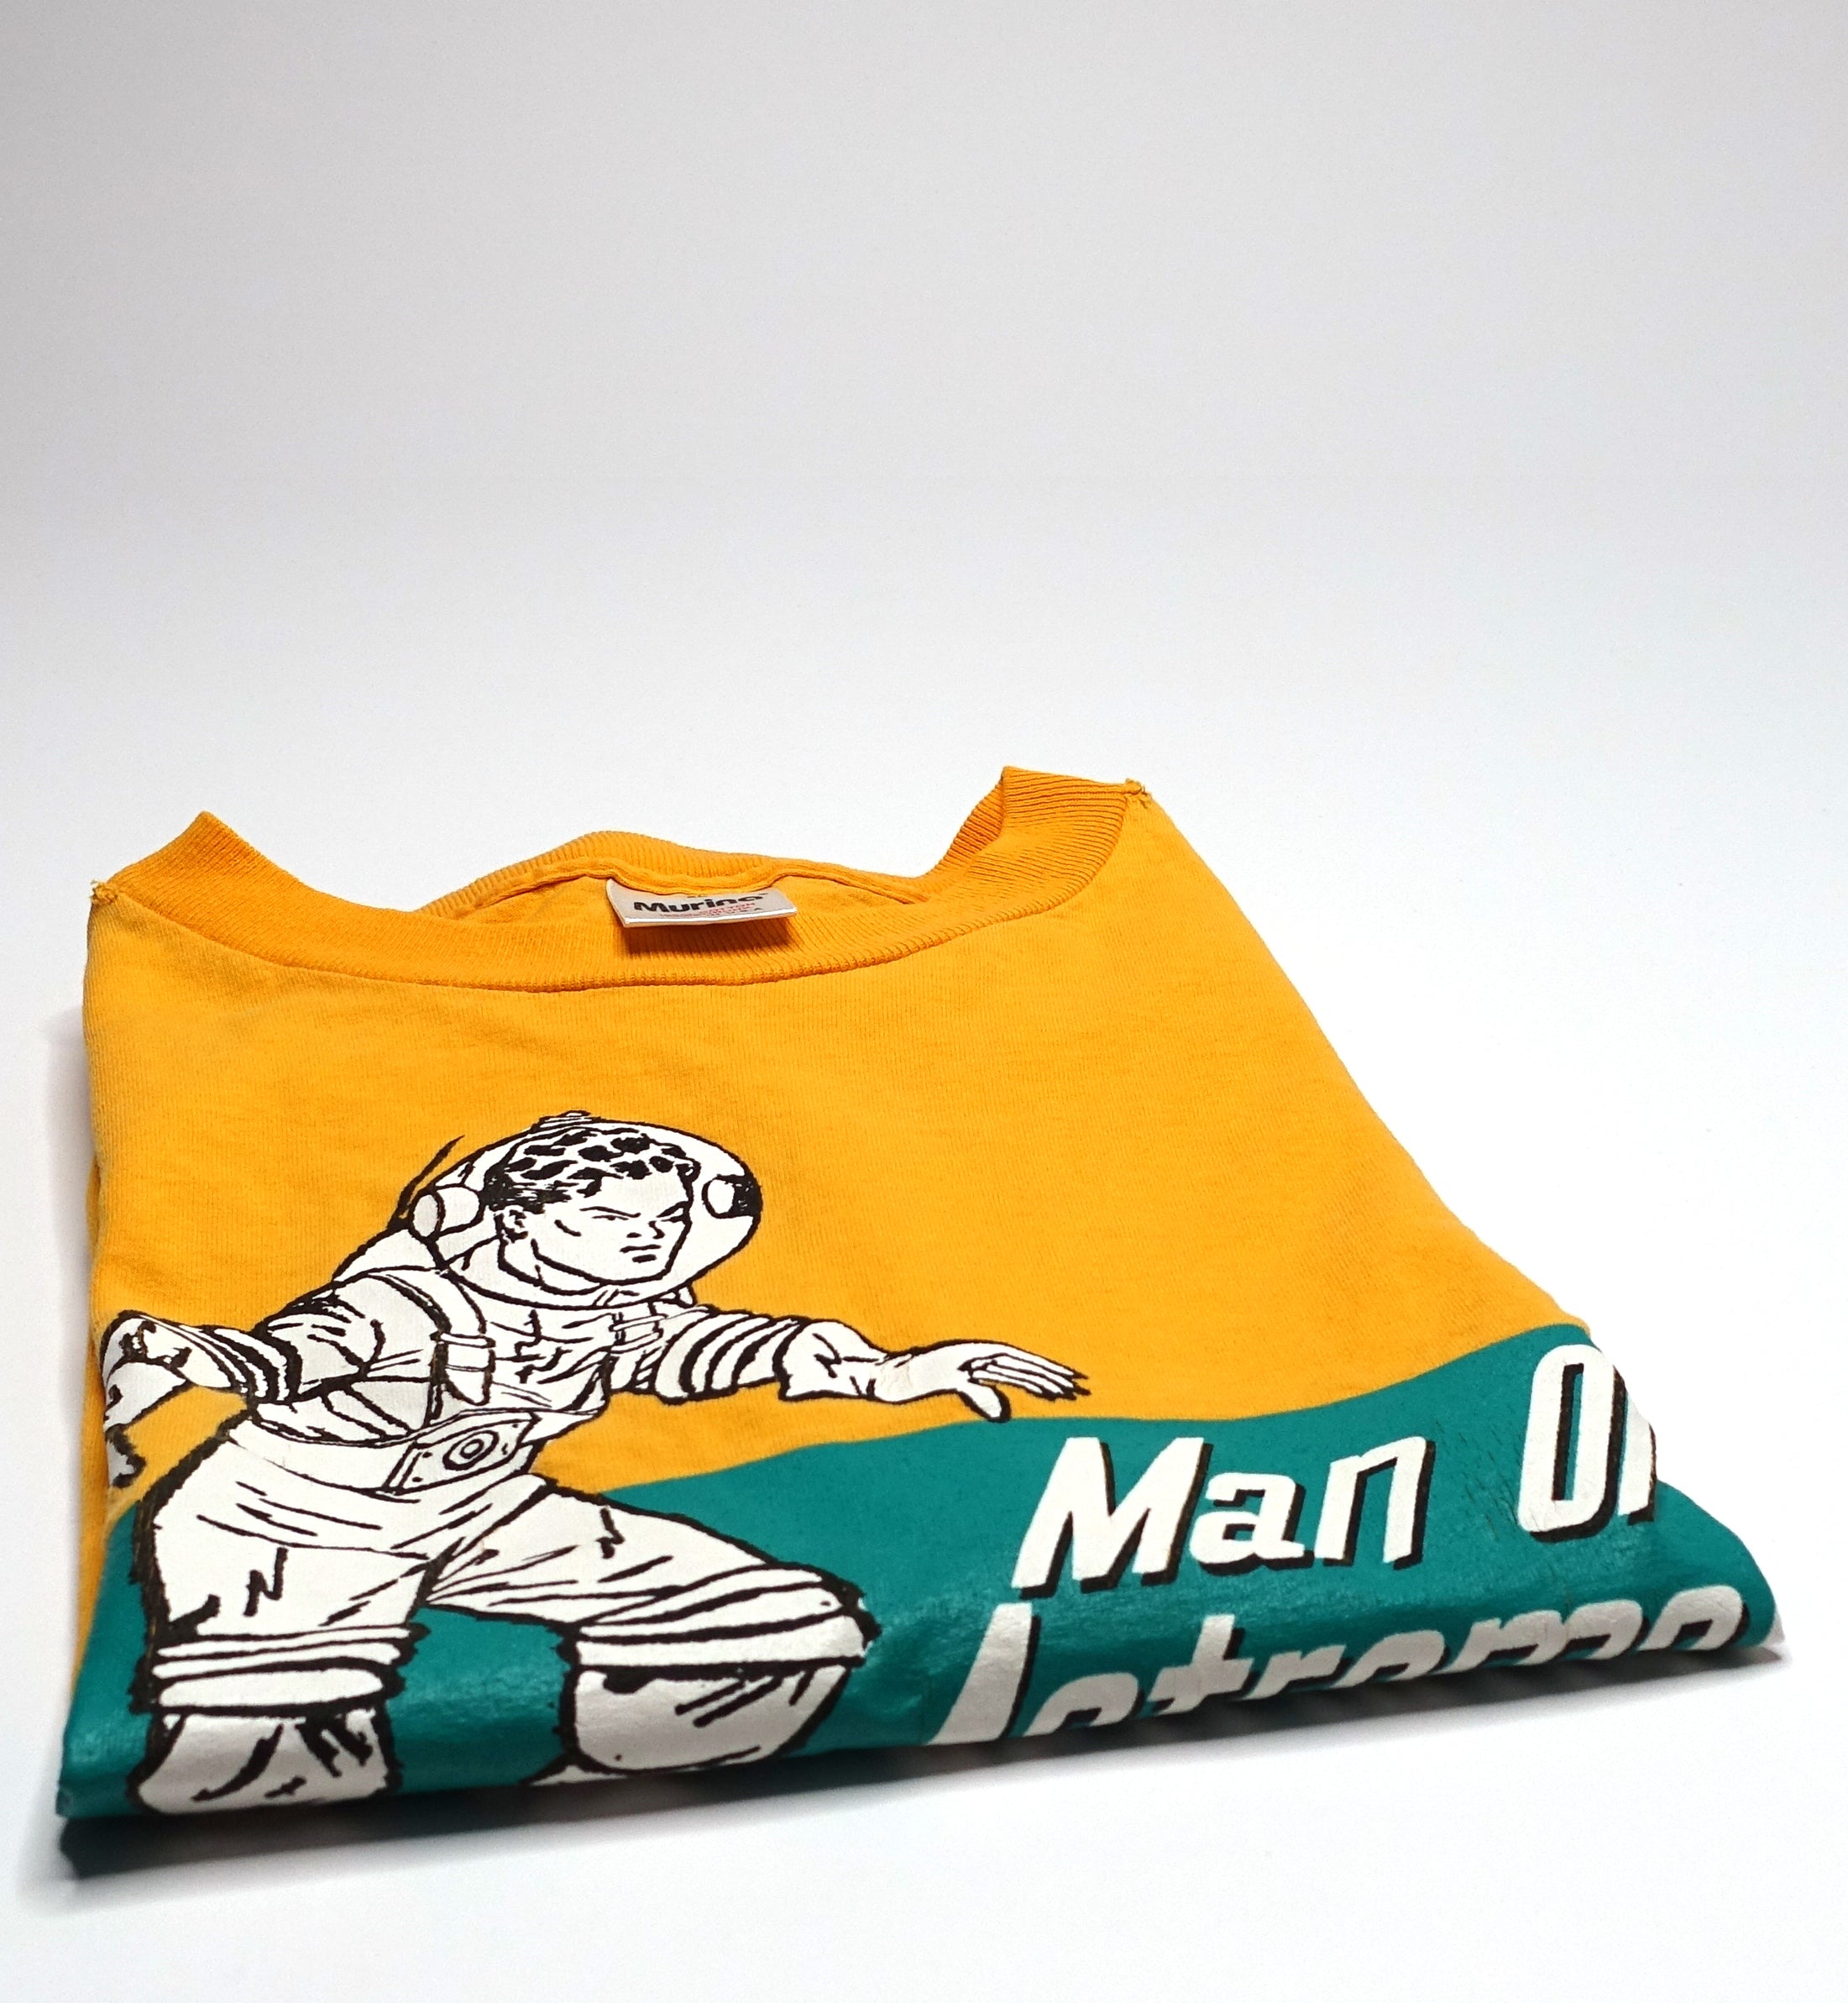 Man Or Astro-man? - Your Weight On The Moon 1994 Tour Shirt Size XL